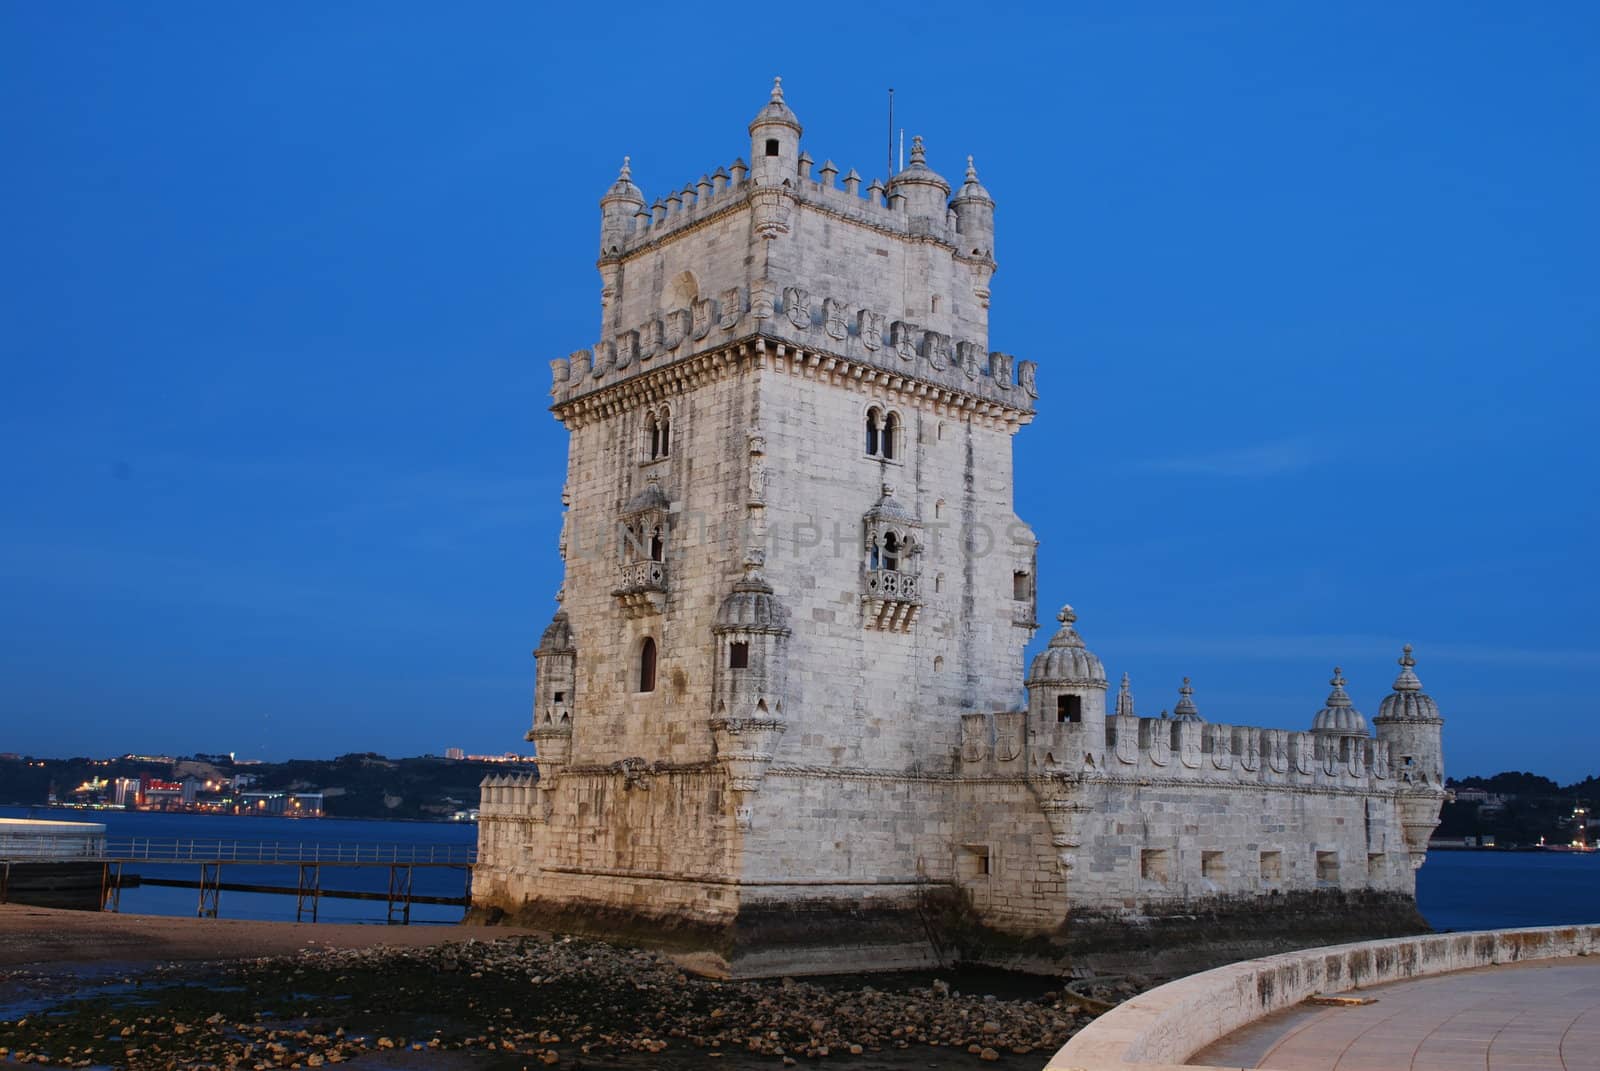 Belem Tower in Lisbon, Portugal (Sunset) by luissantos84